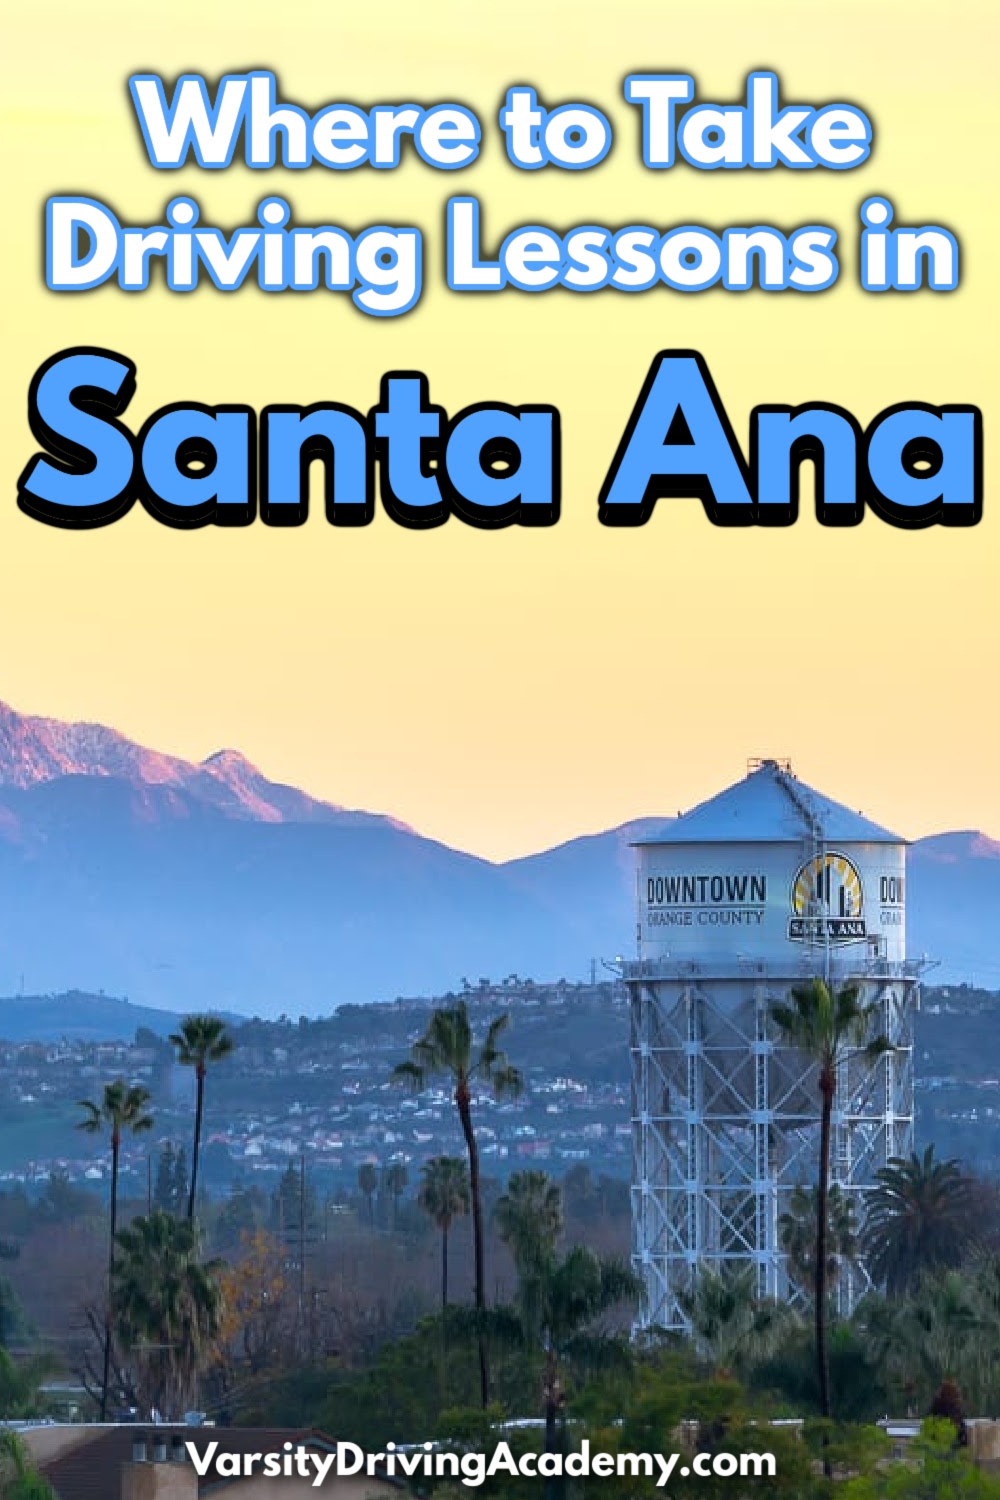 Knowing where to take driving lessons in Santa Ana can help prepare you for the busy roads ahead that require you to follow specific laws.